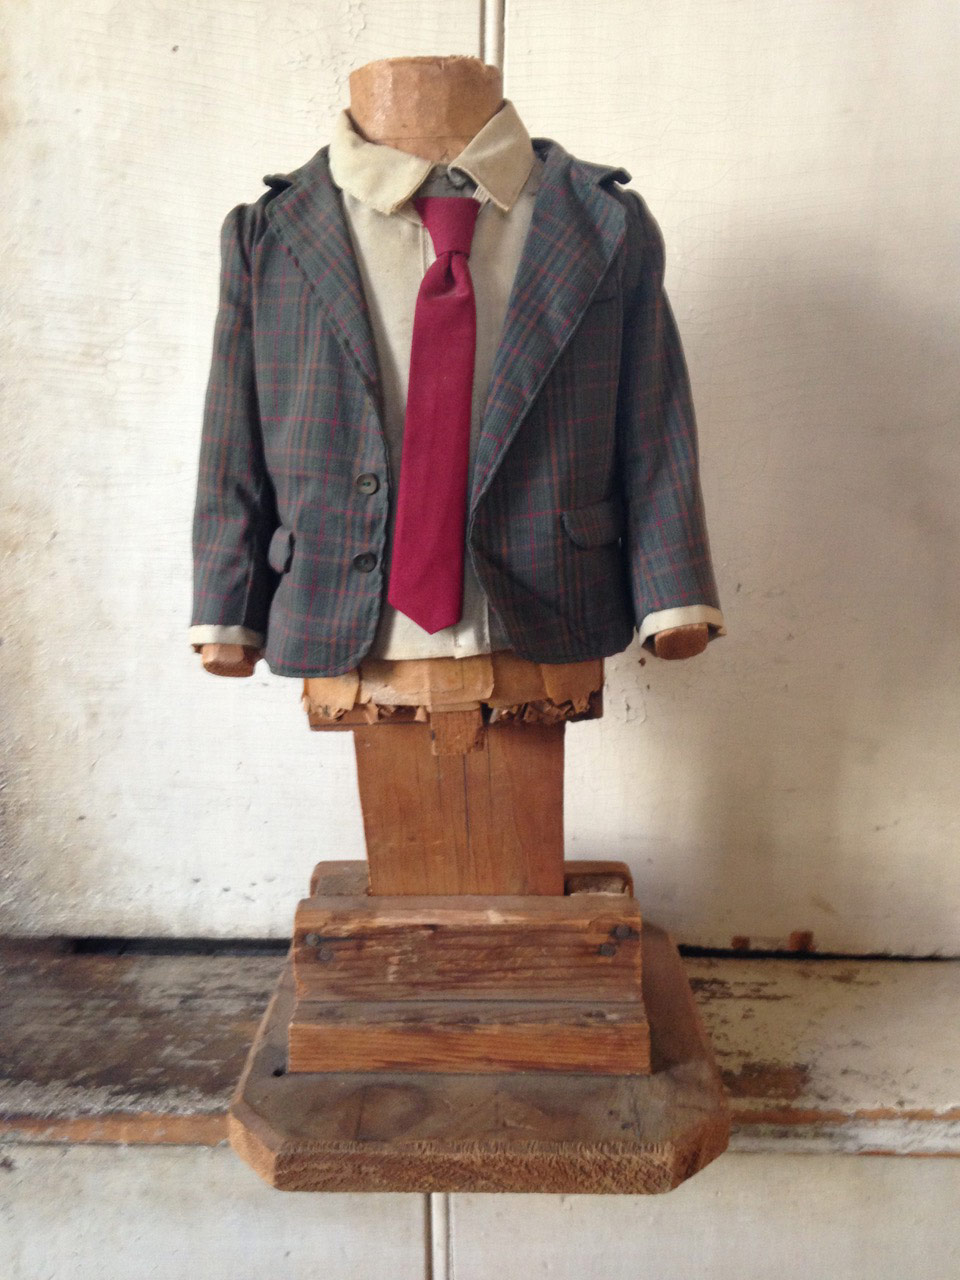 Mini assemblage of men’s clothing for salesman